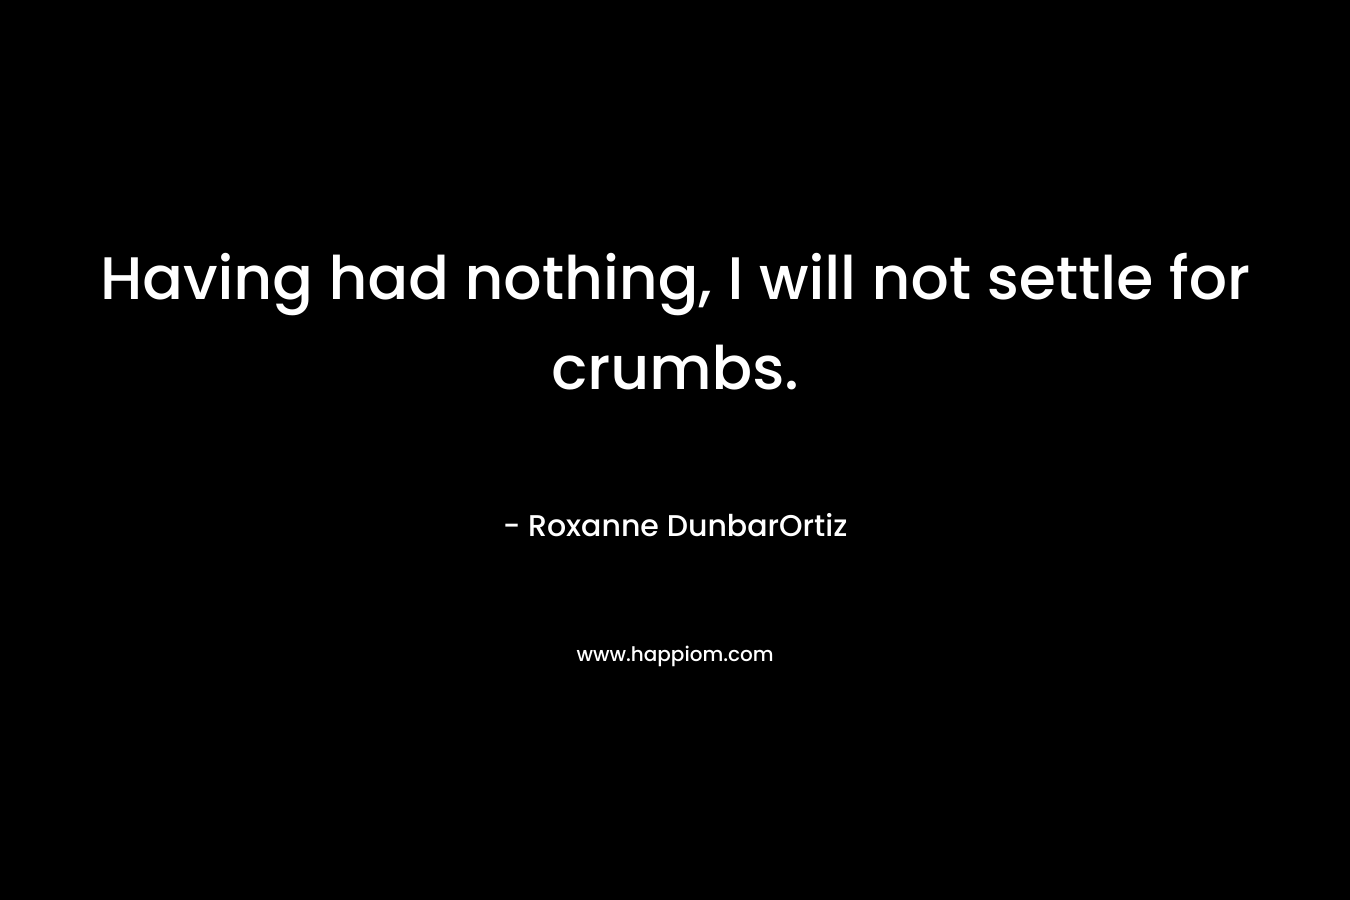 Having had nothing, I will not settle for crumbs.